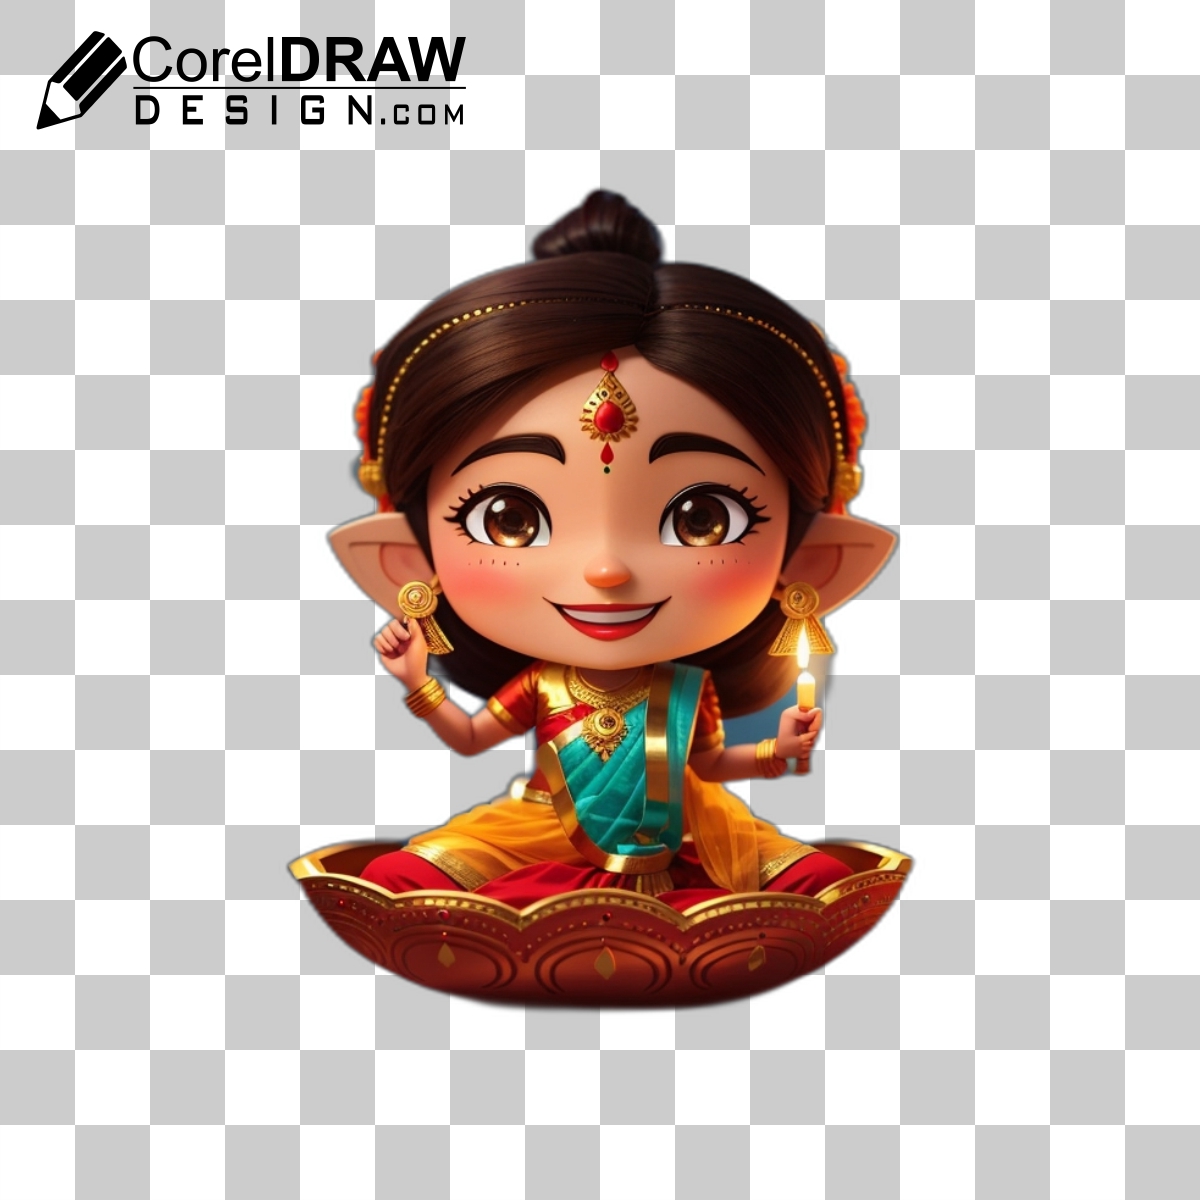 diwali cartoon characters PNG image download for free